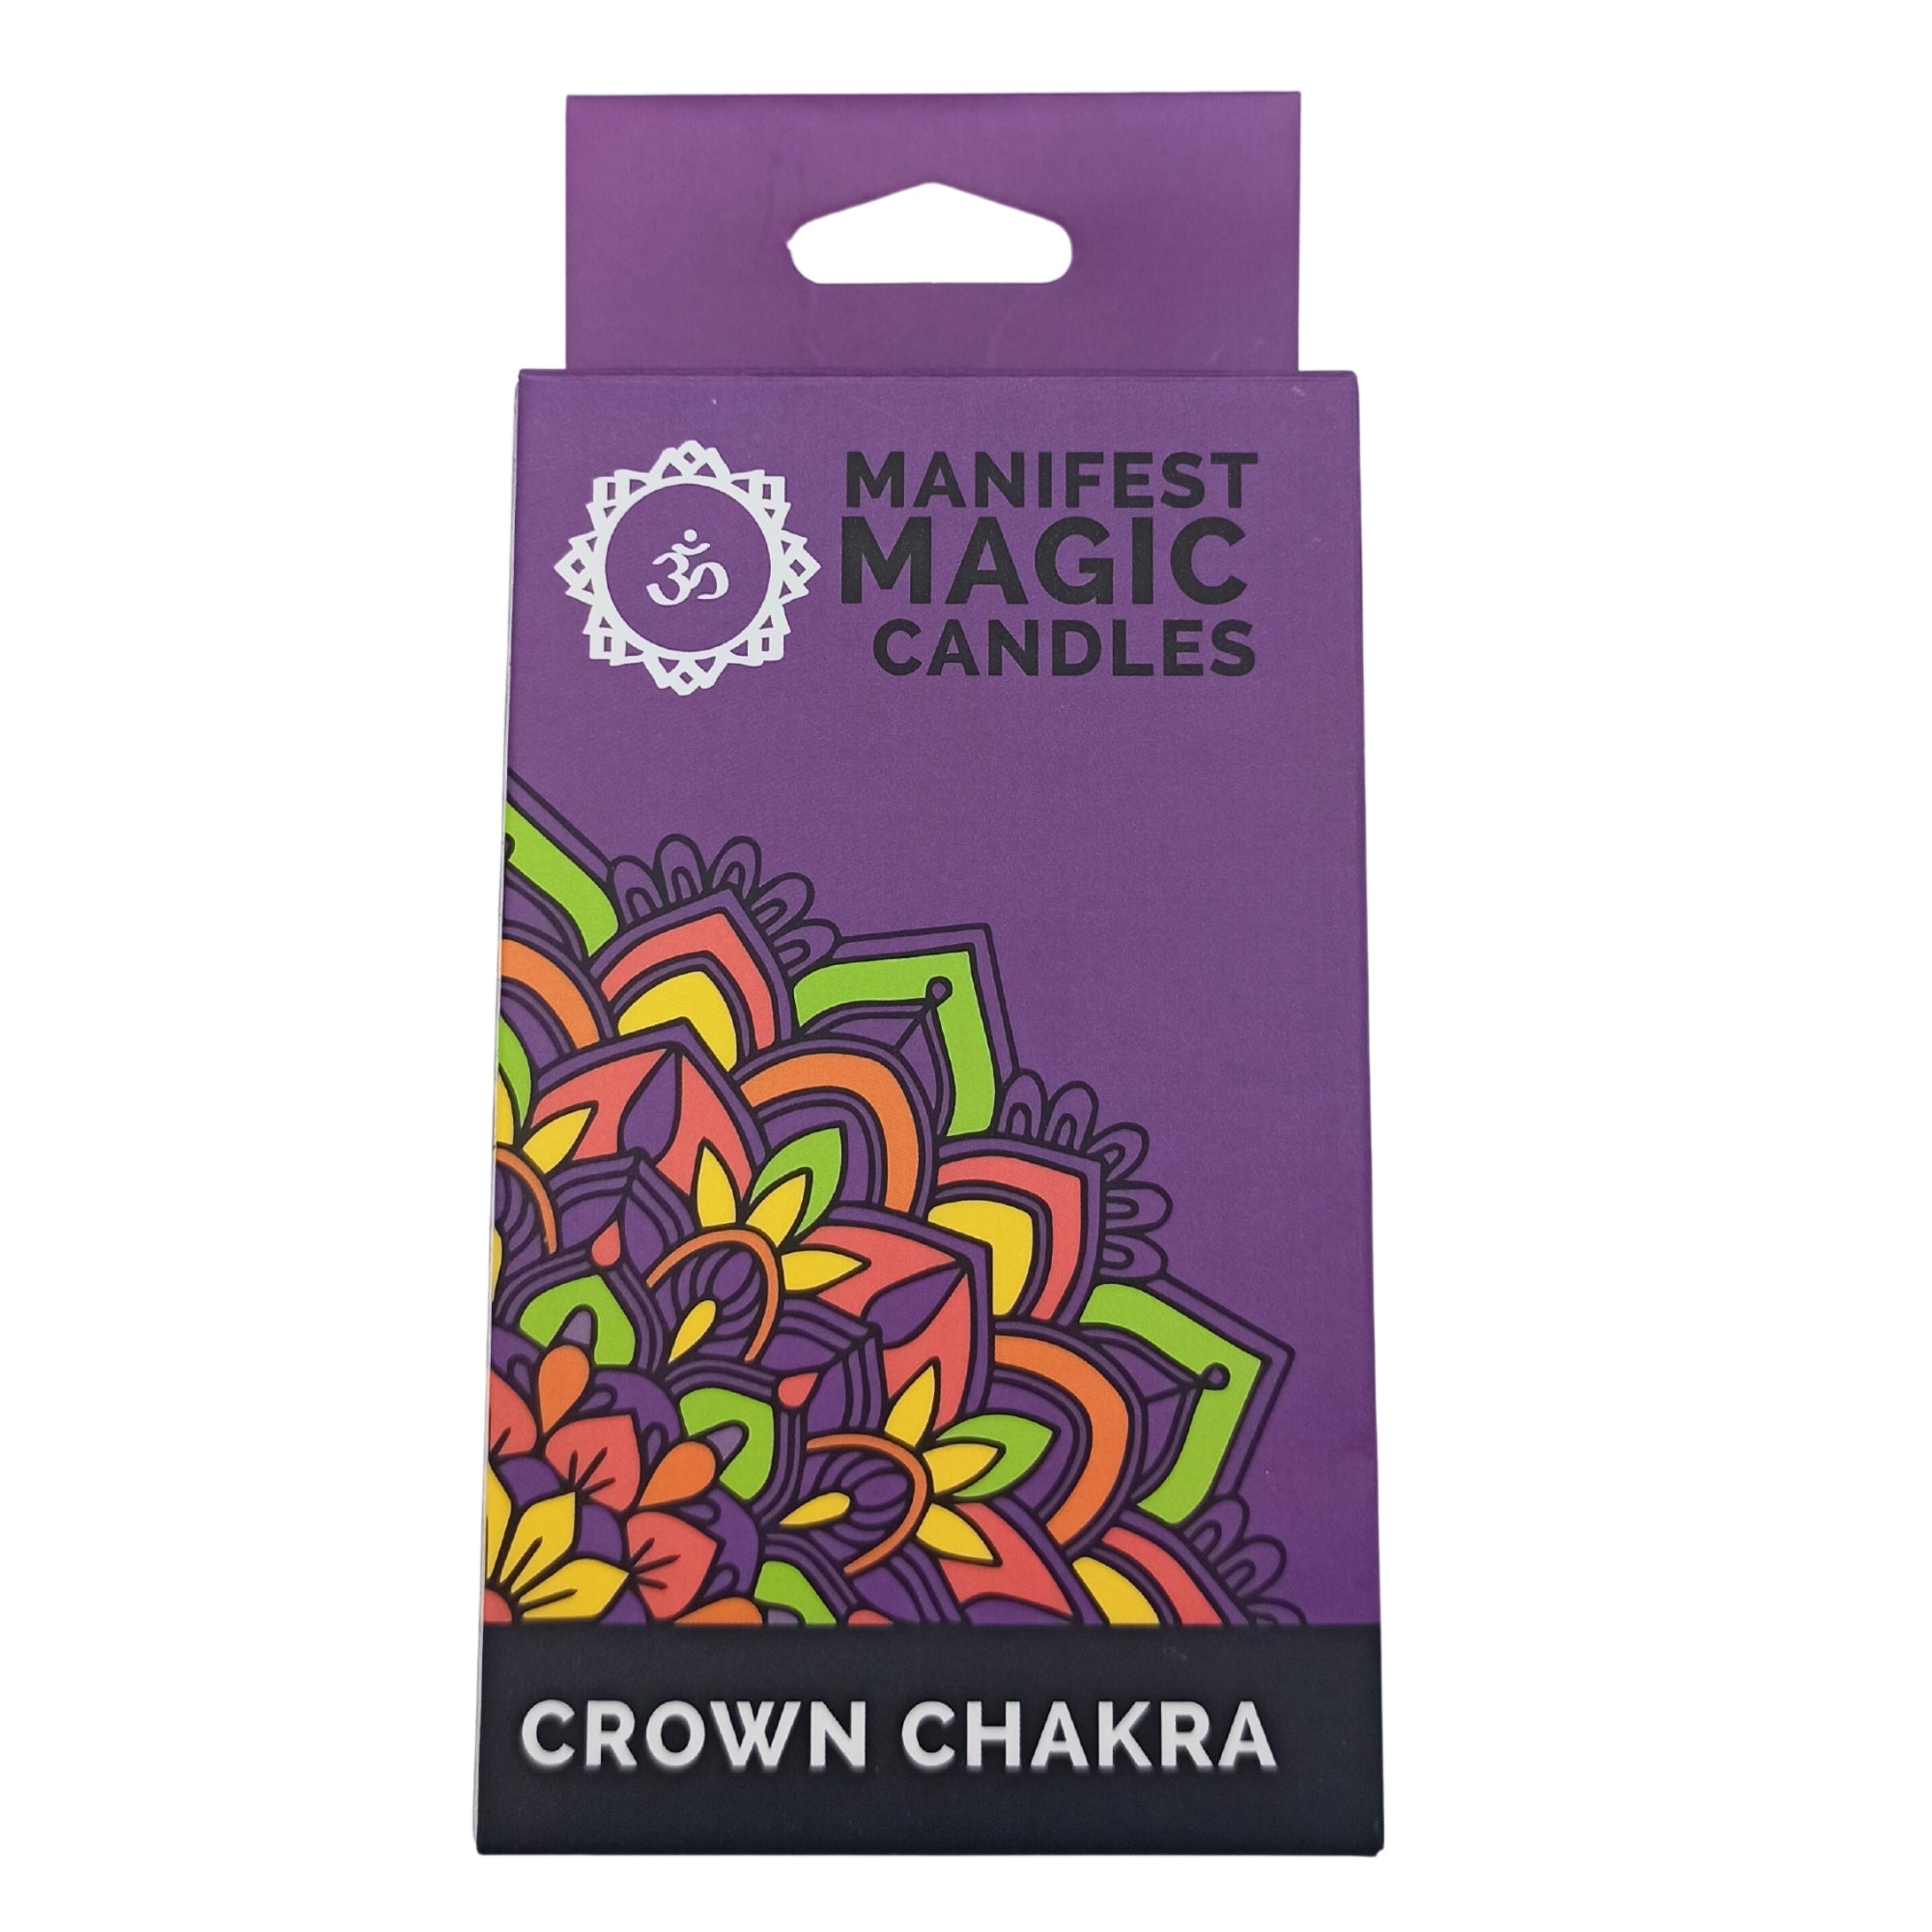 View Manifest Magic Candles pack of 12 Violet Crown Chakra information